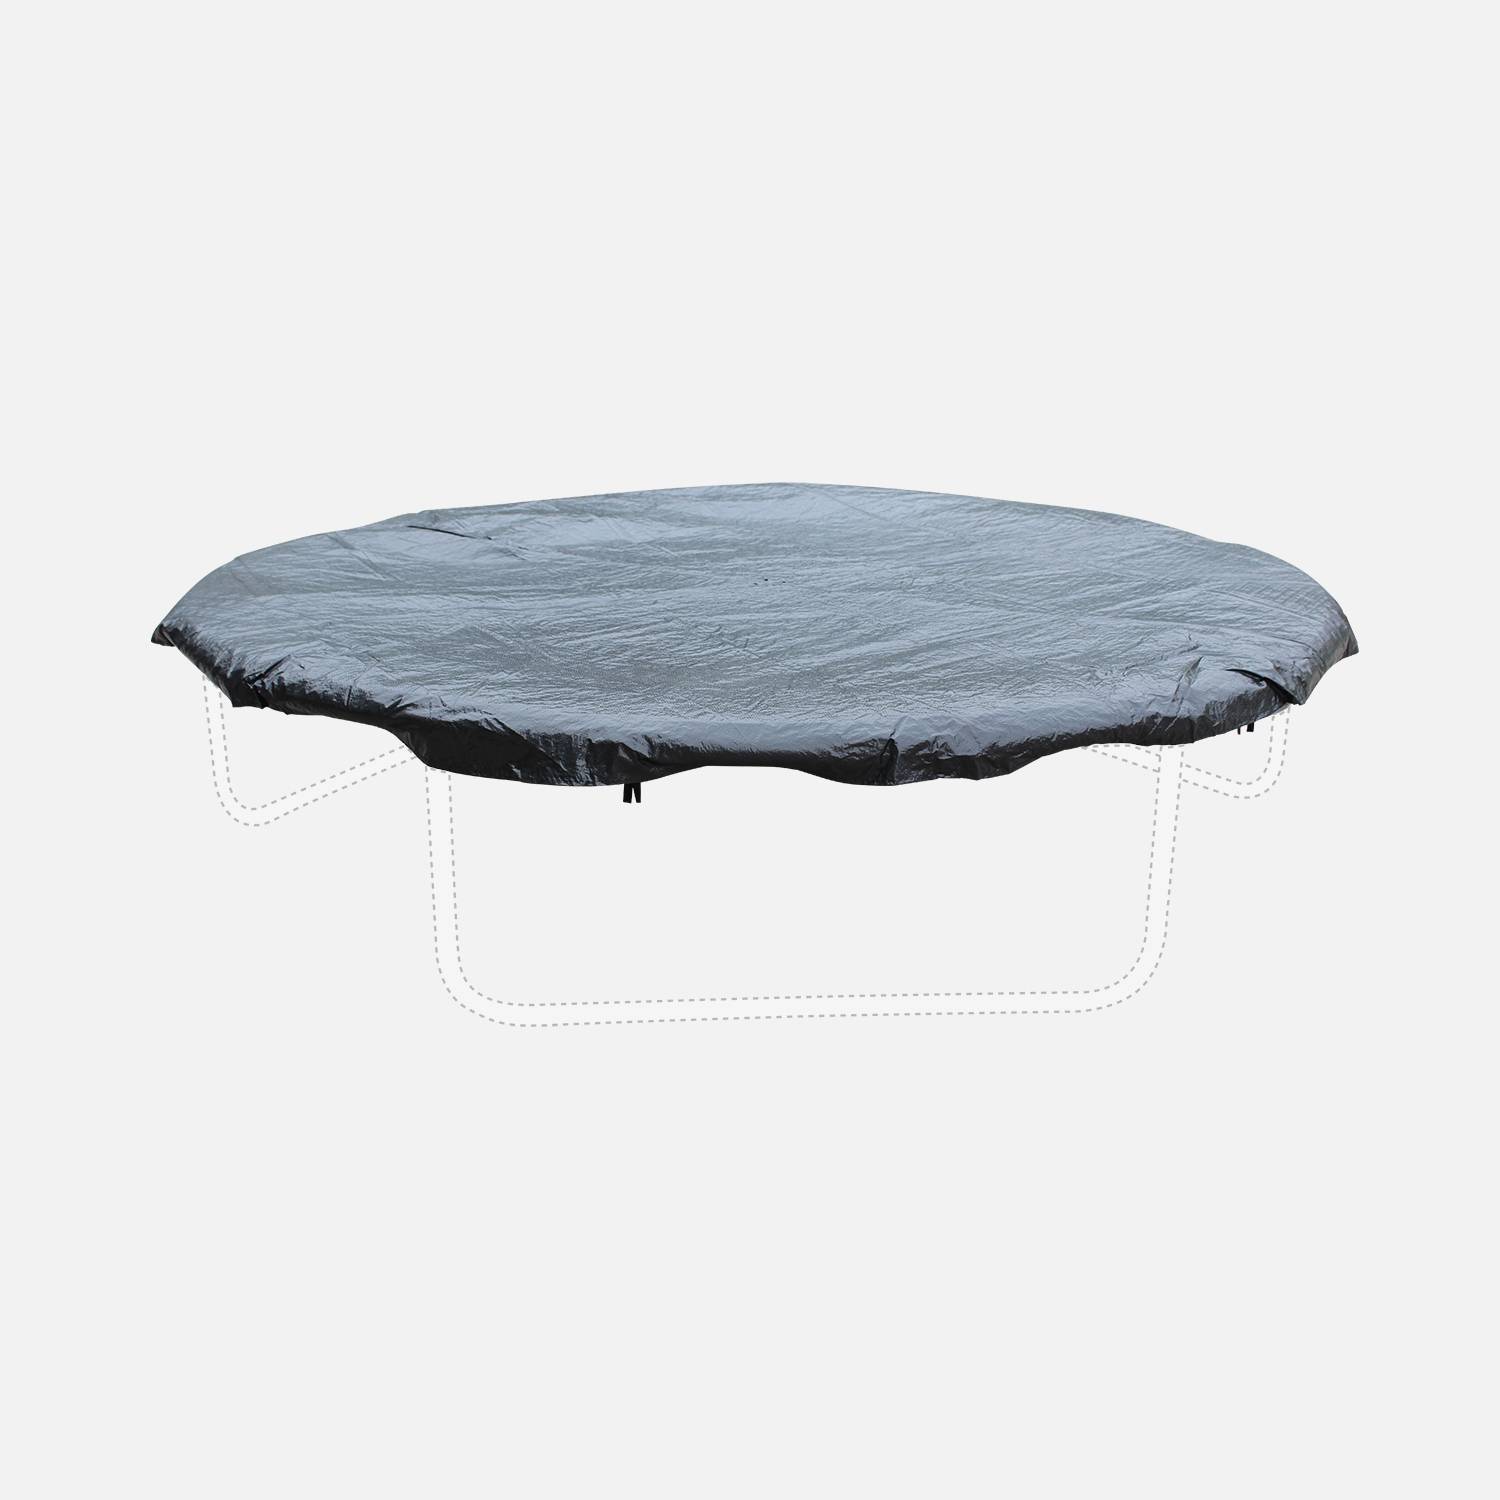 Trampoline cover 245/250cm - fits trampolines of all brands Photo1